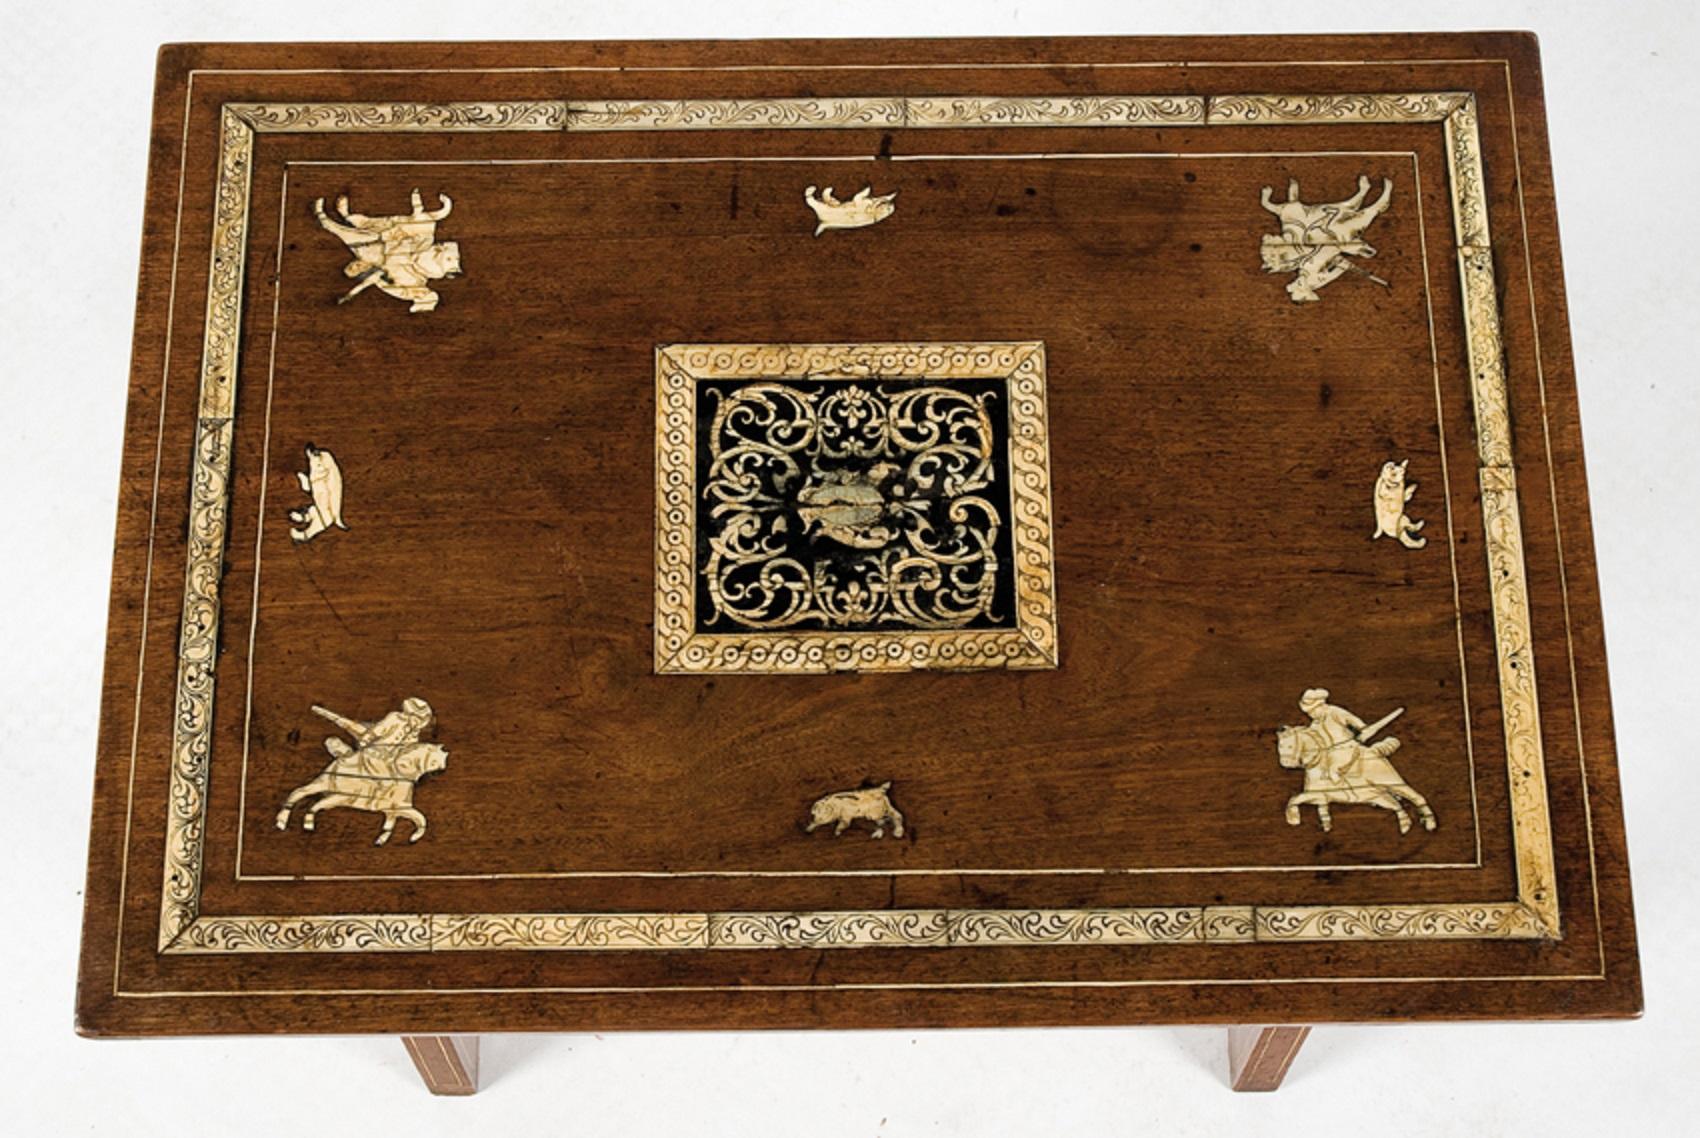 Rectangular tabletop table decorated with inlaid painted figurative and vegetable (hunting riders in the corners and animals alternated around a central roleplaying square) whose legs, of type 